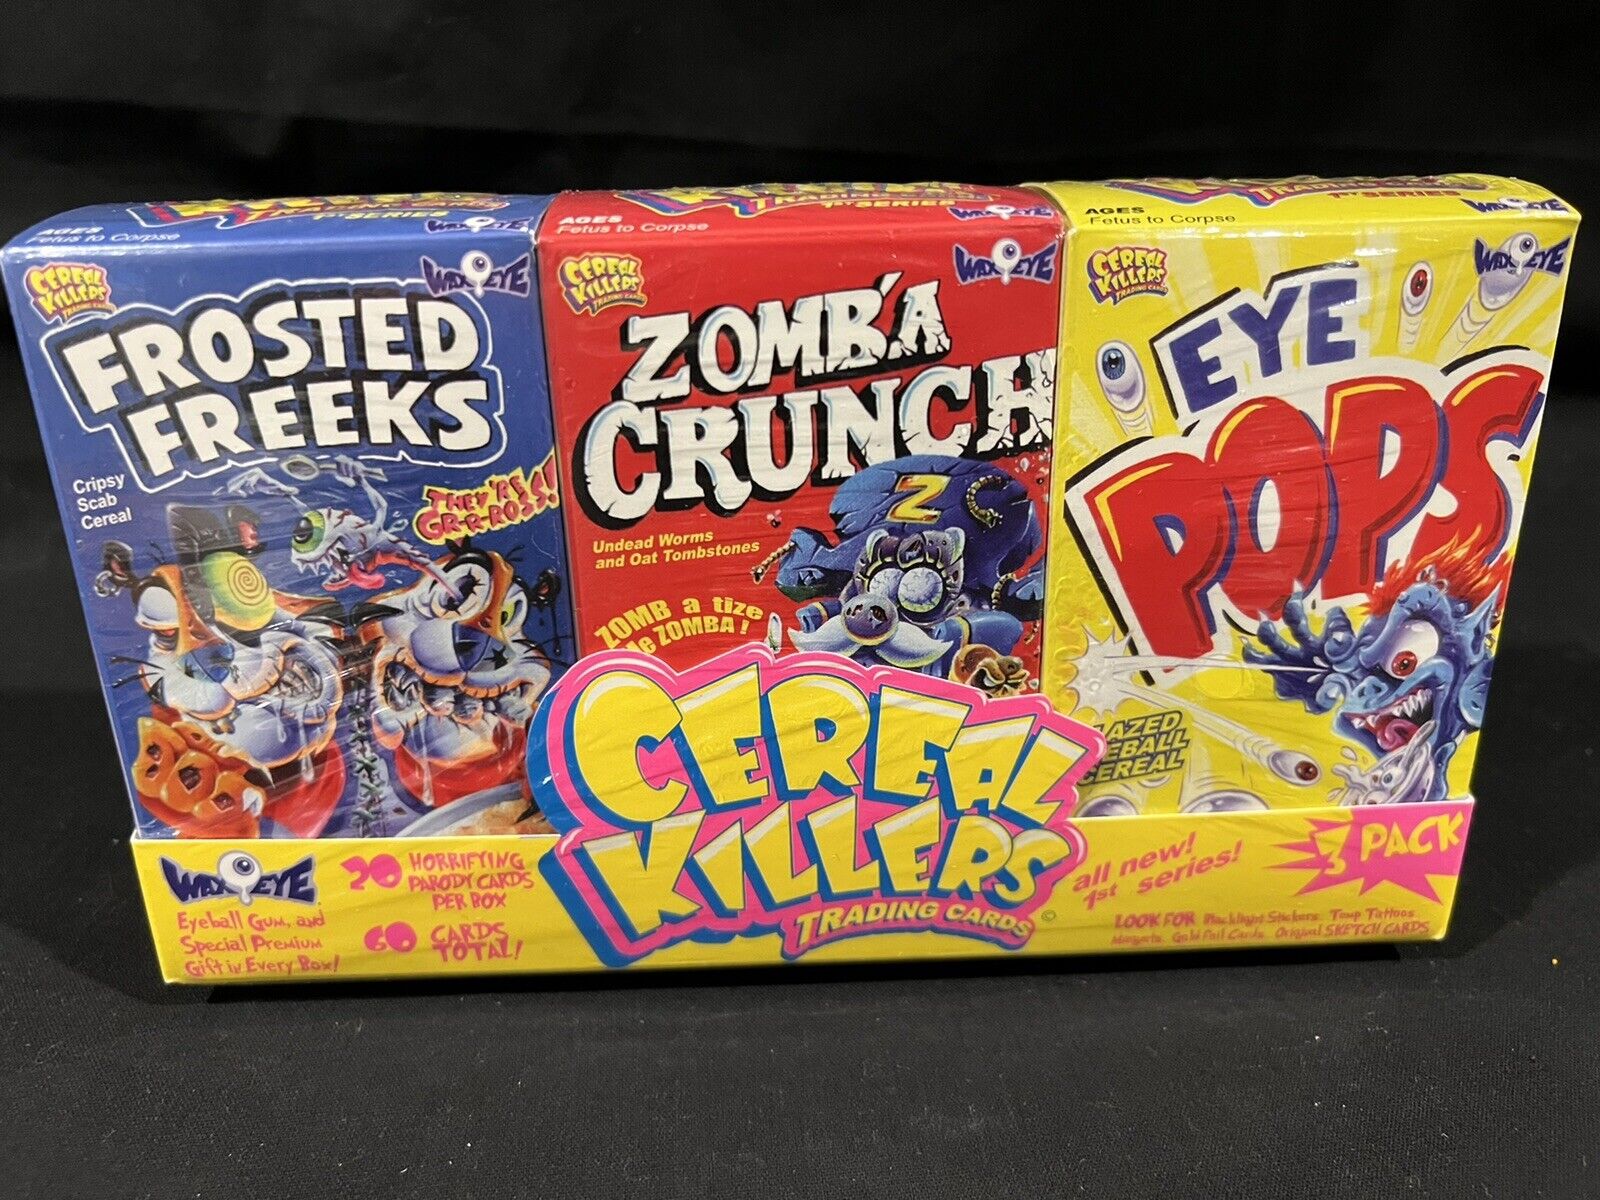 WAX EYE CEREAL KILLERS SEALED 3 BOX SET LIKE GARBAGE PAIL KIDS WACKY PACKAGES